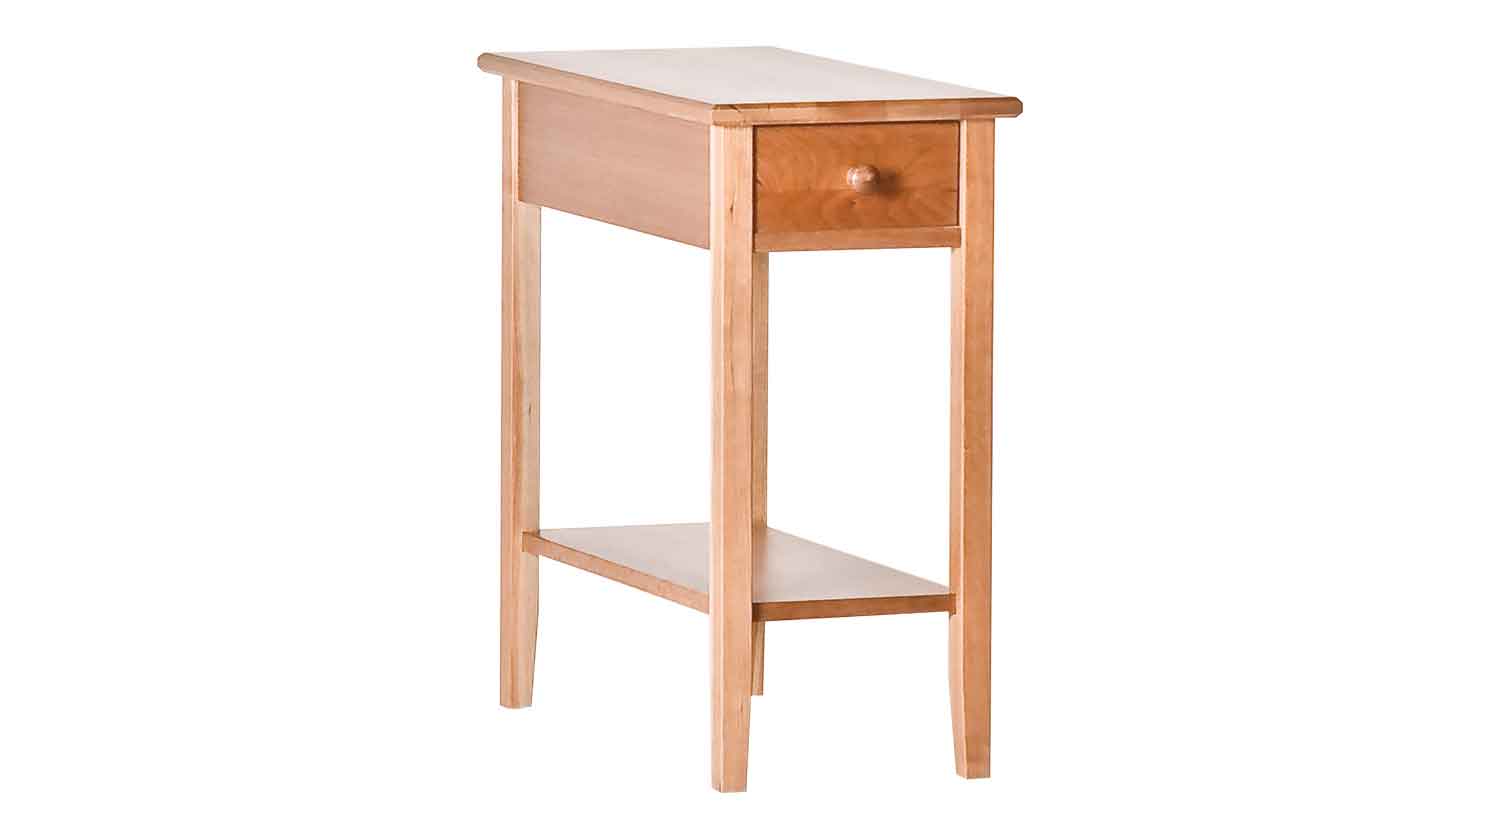 circle furniture shaker narrow side table accent tables bedroom end kids chairside ashley being sold free shipping promo code stand stickley houston ethan allen hepburn sofa round